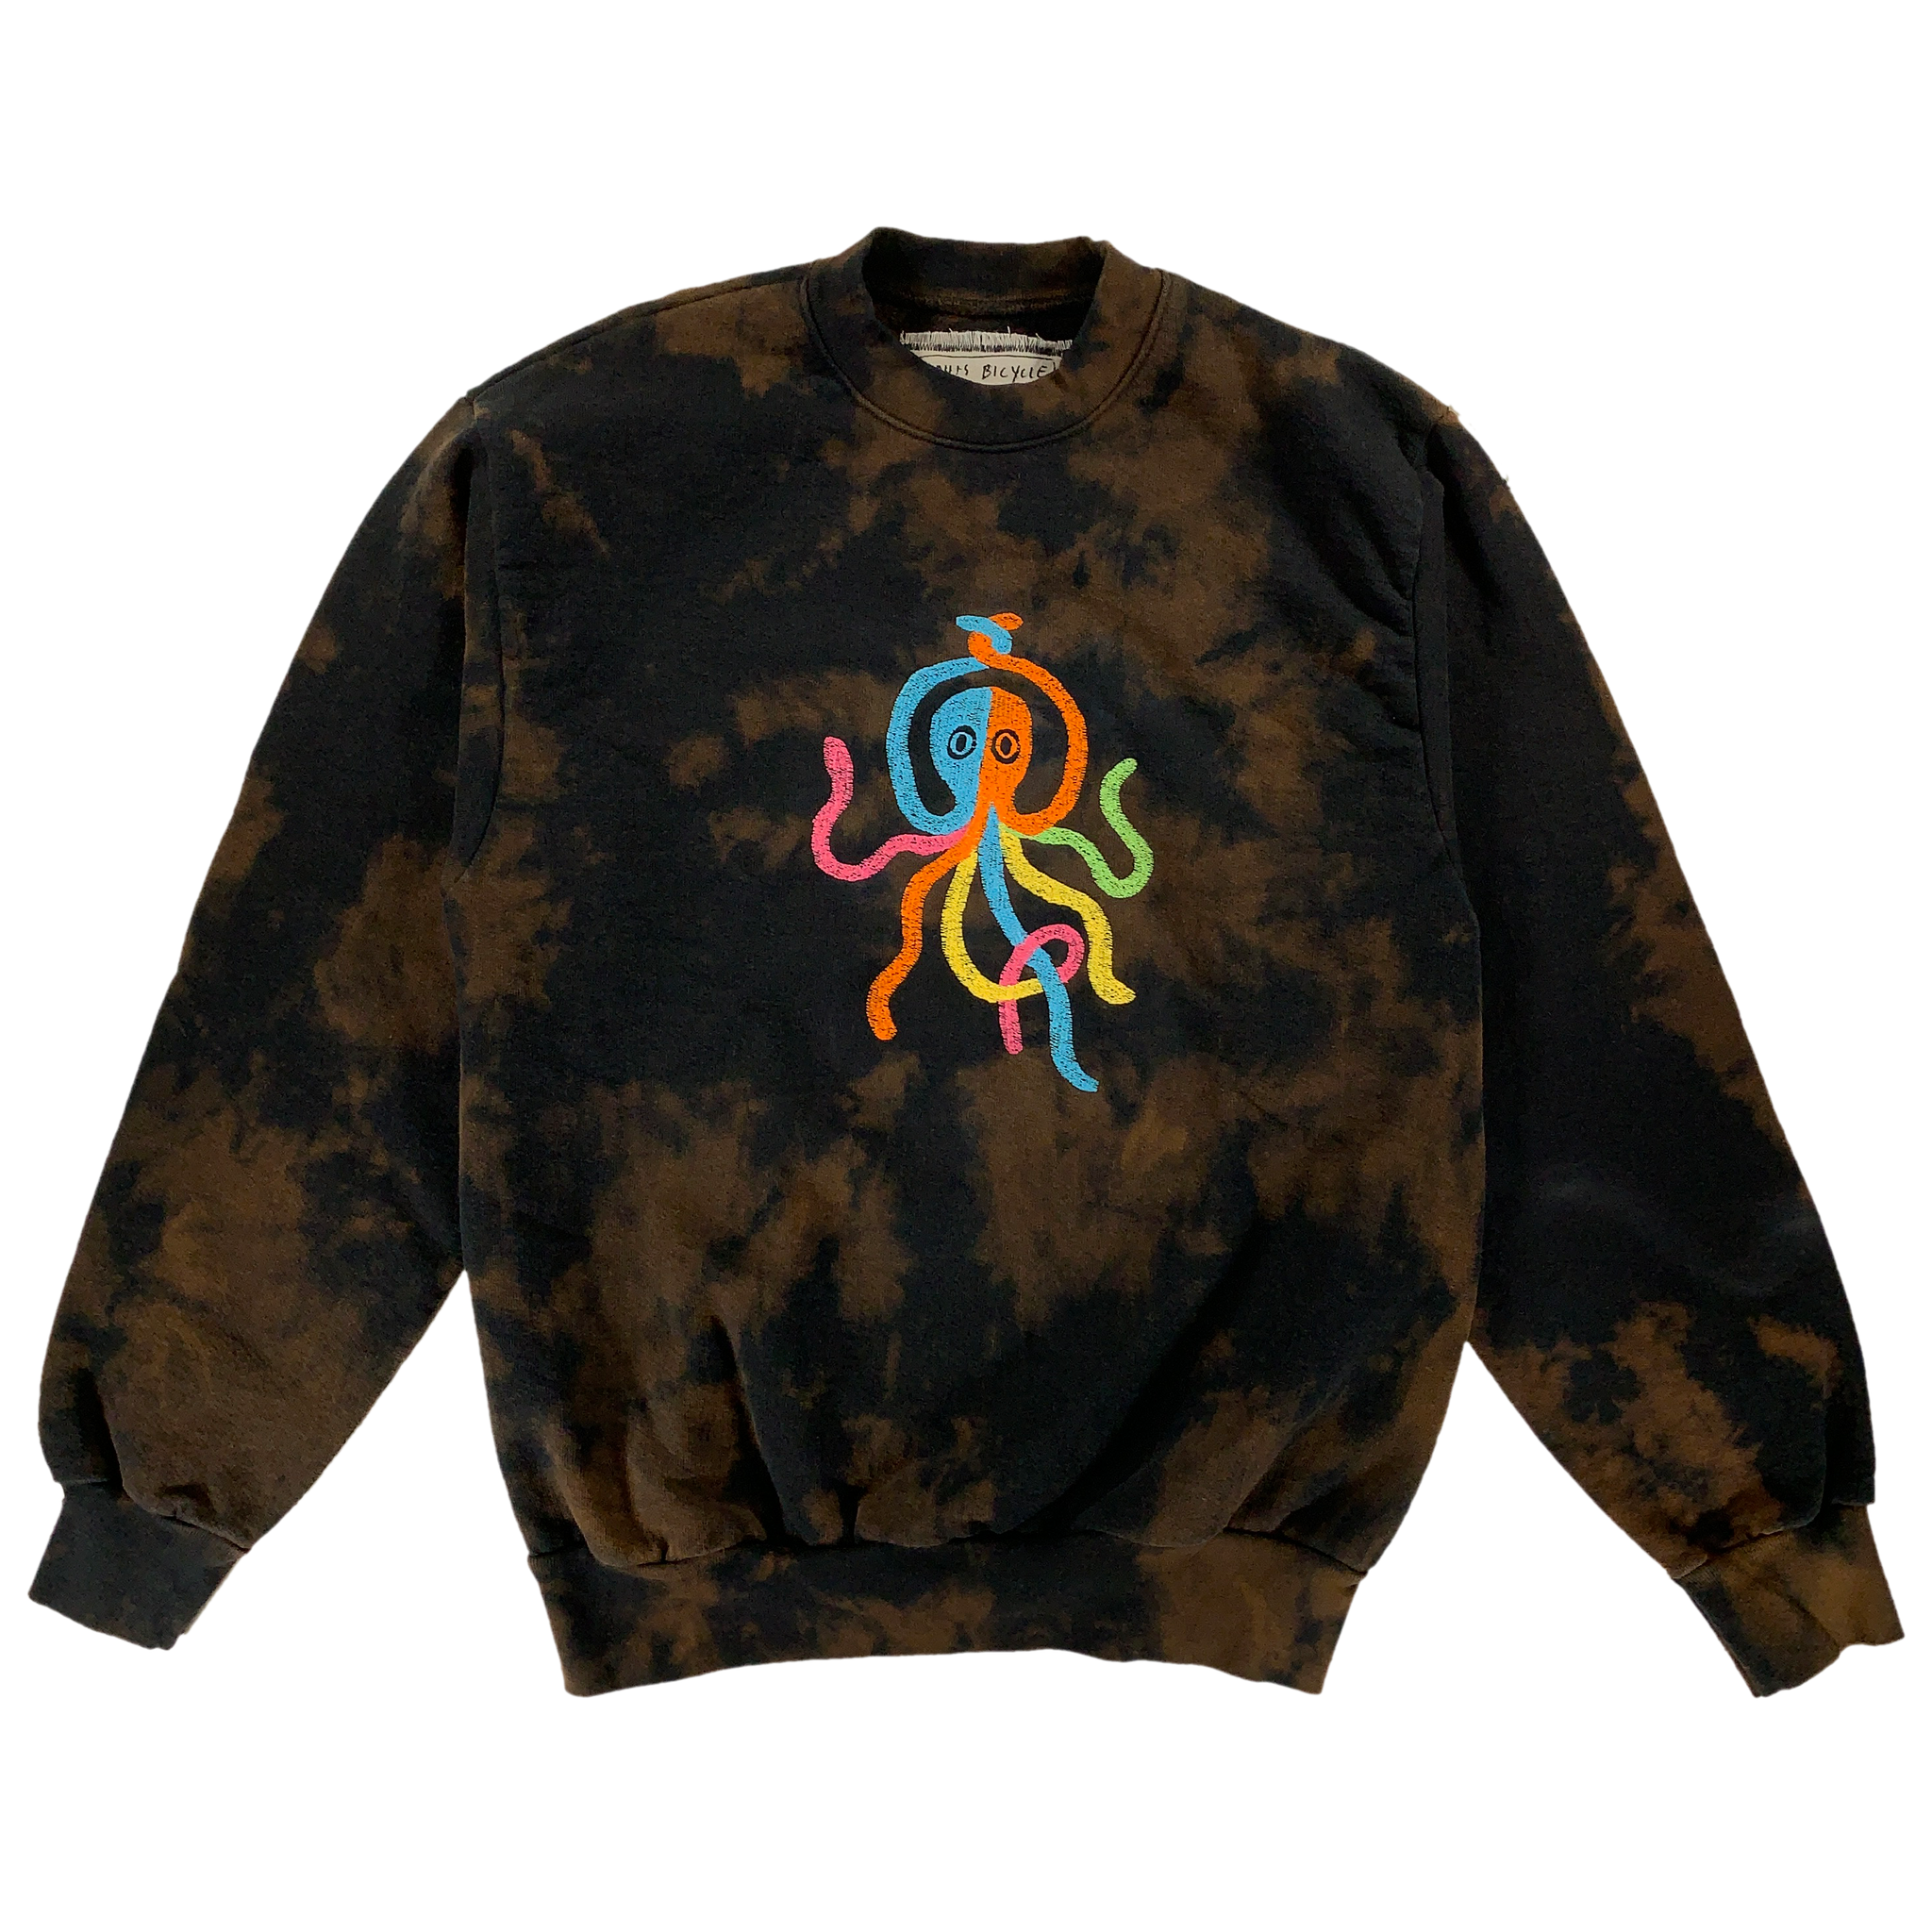 Embroidered and Dyed Crewneck Sweatshirt - Small